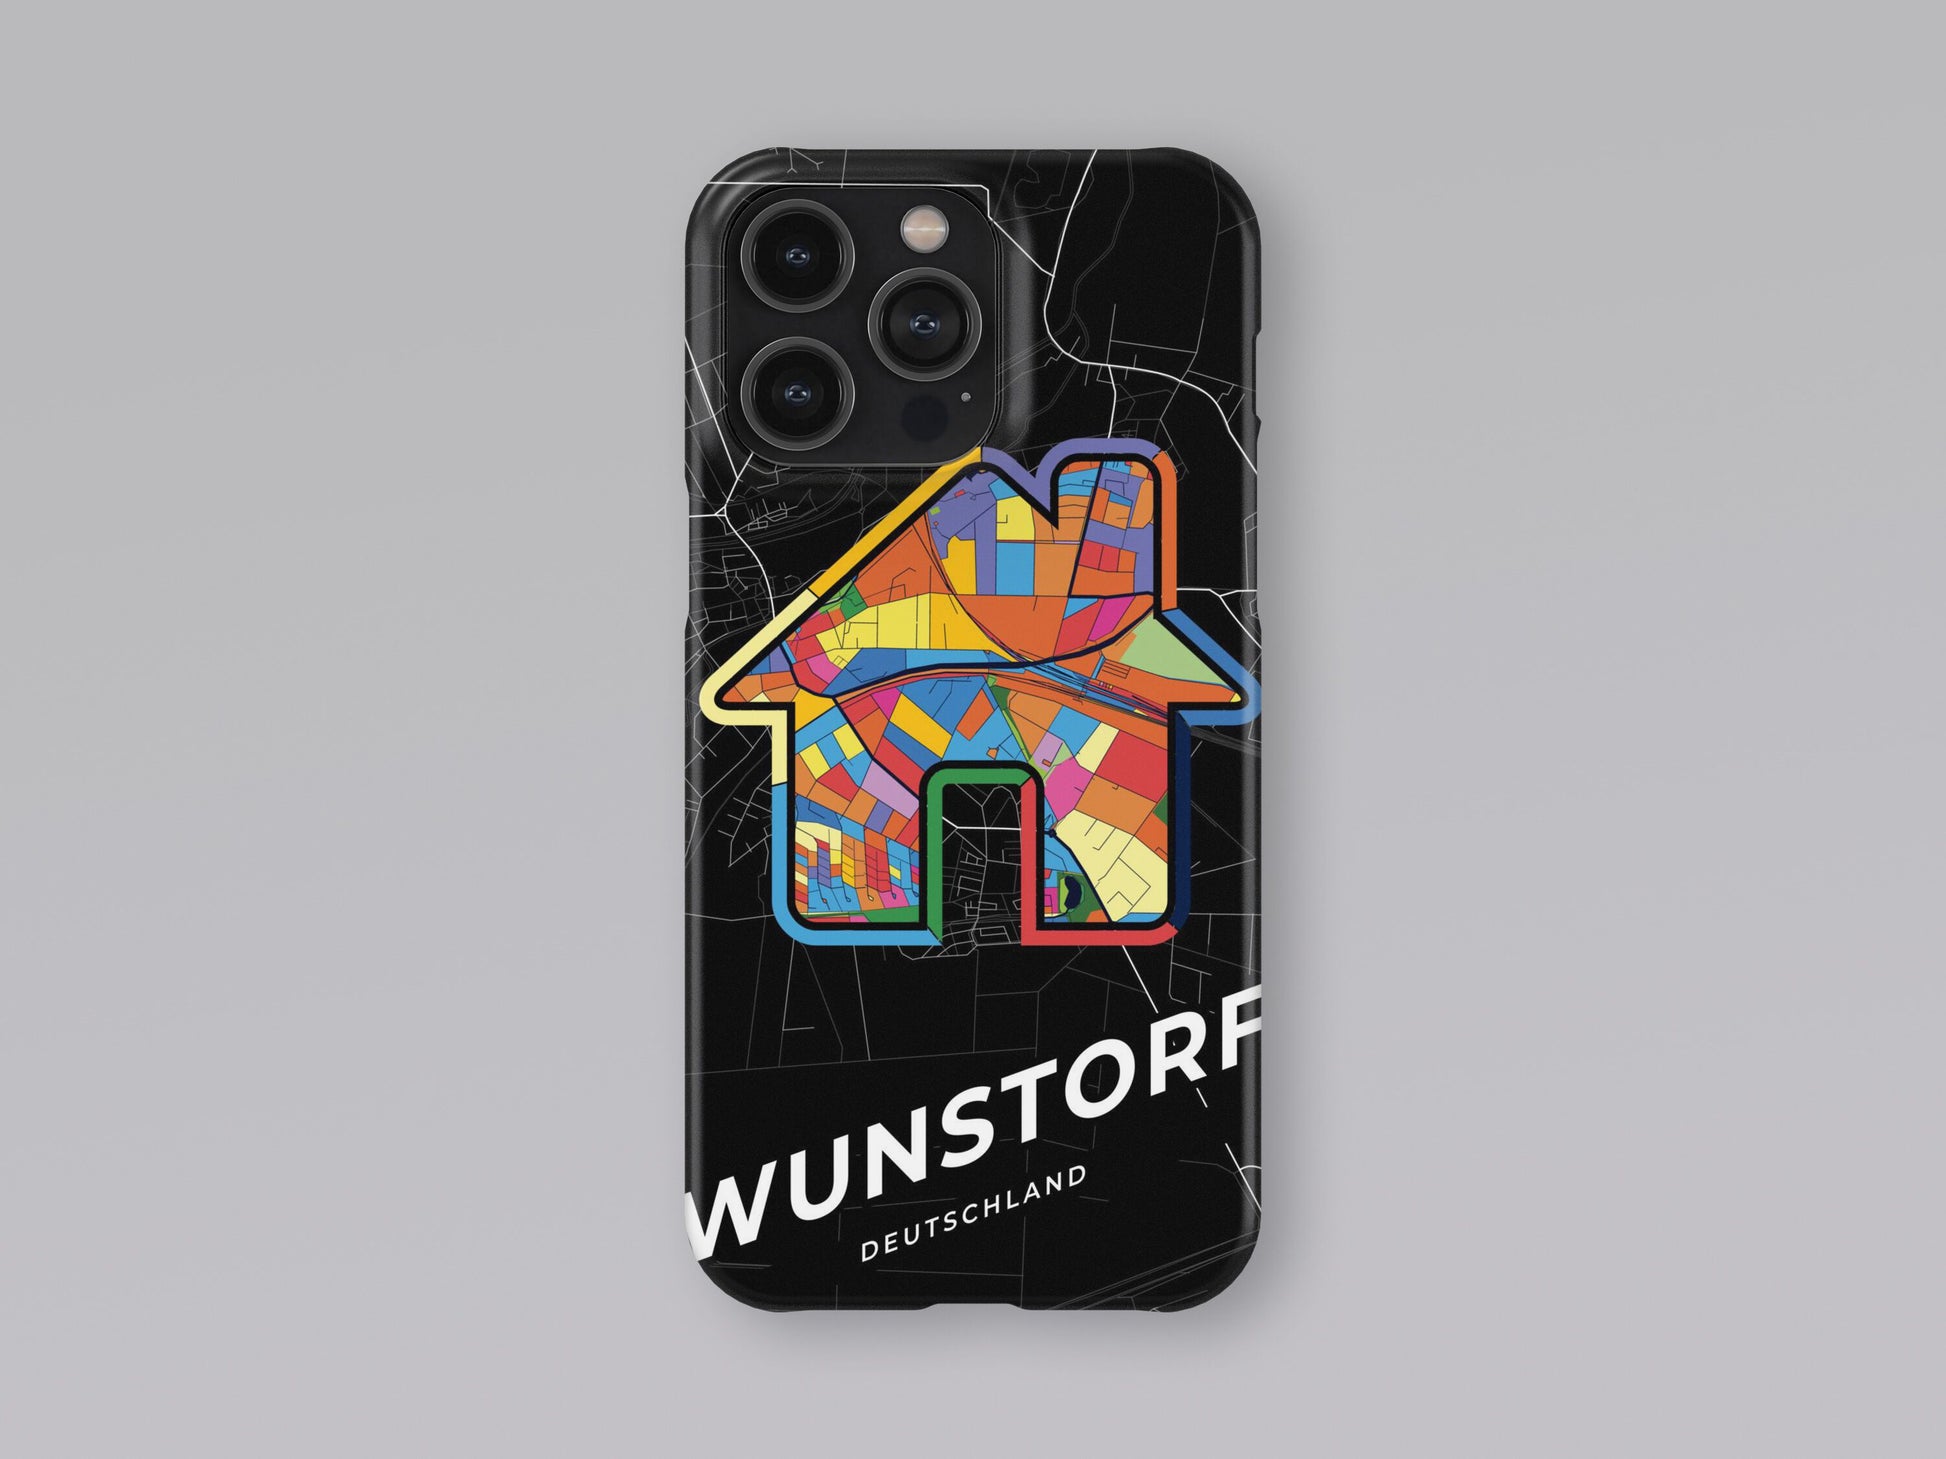 Wunstorf Deutschland slim phone case with colorful icon 3